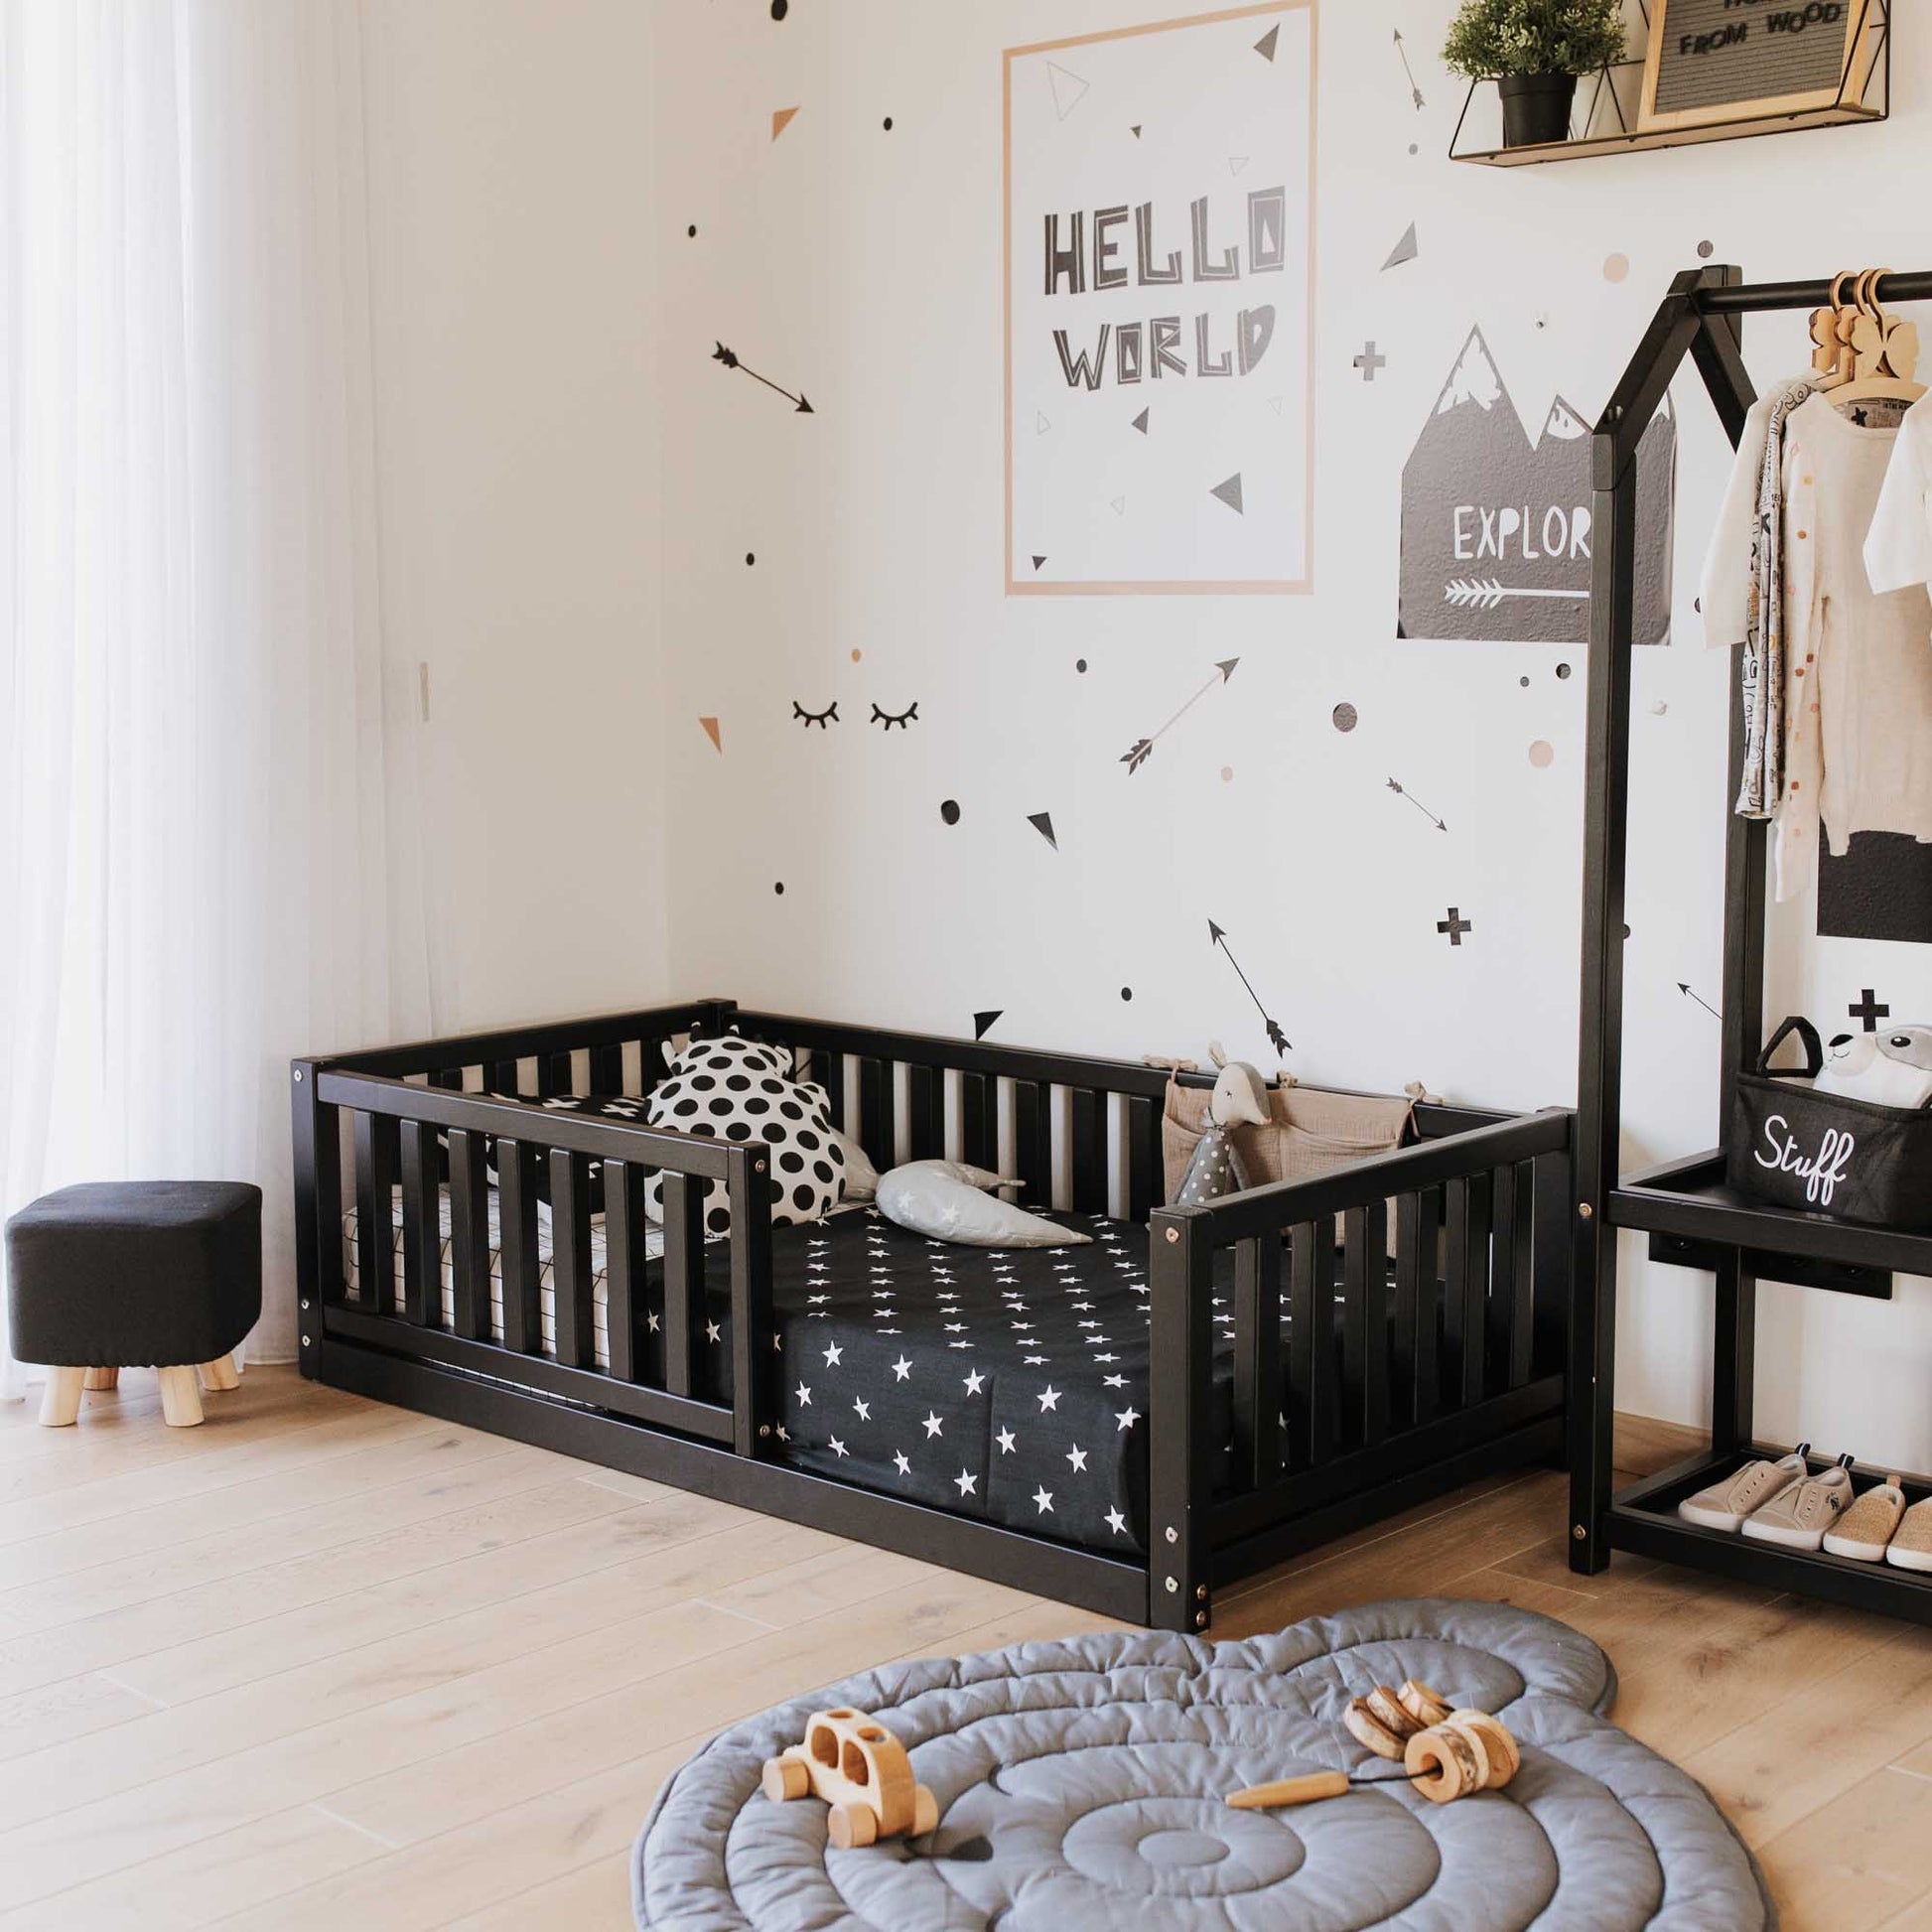 A children's room with a Sweet Home From Wood 2-in-1 toddler bed on legs with a vertical rail fence adorned with polka dot wall decals.